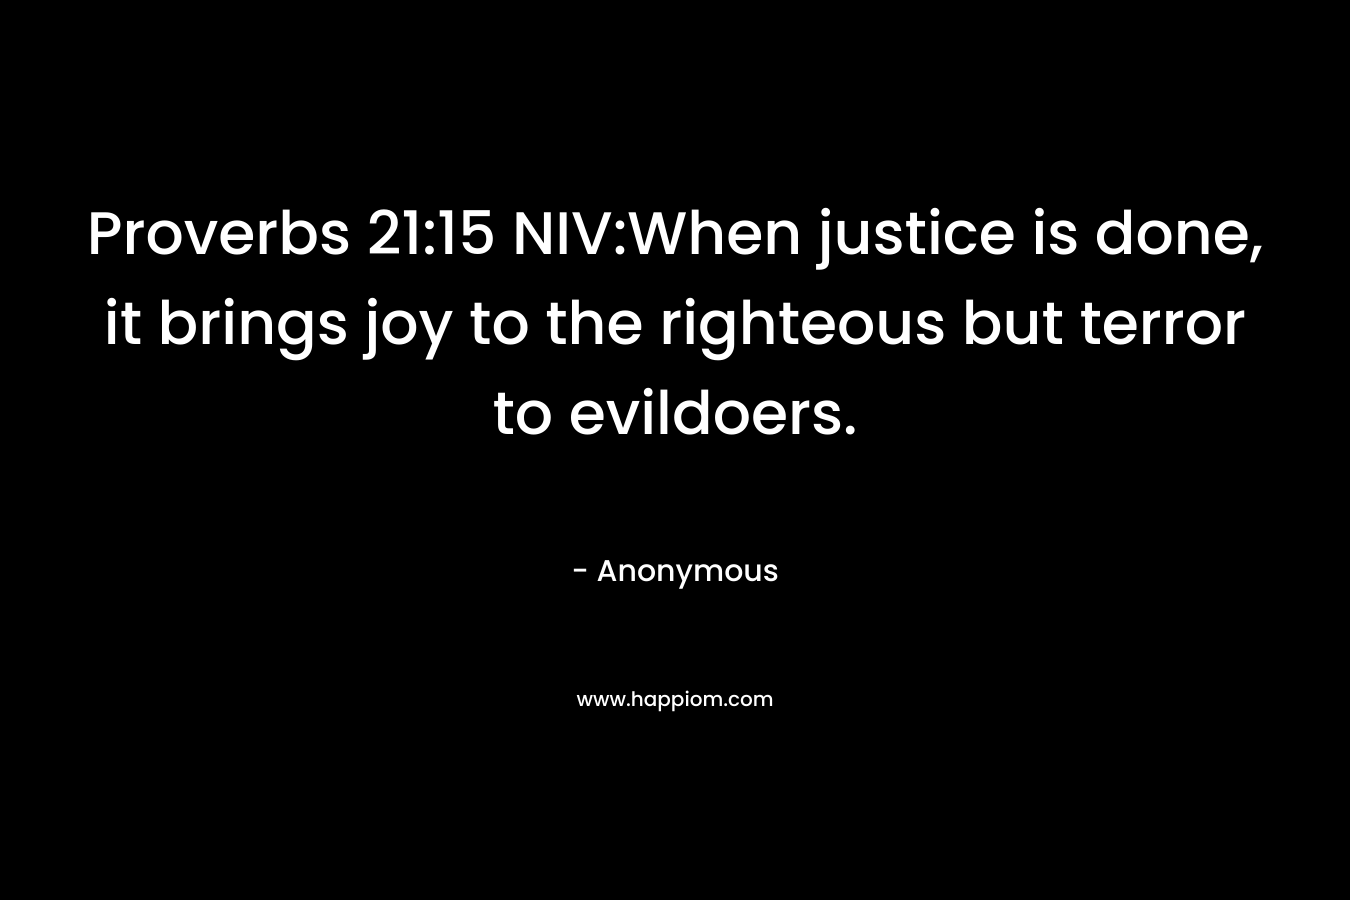 Proverbs 21:15 NIV:When justice is done, it brings joy to the righteous but terror to evildoers.